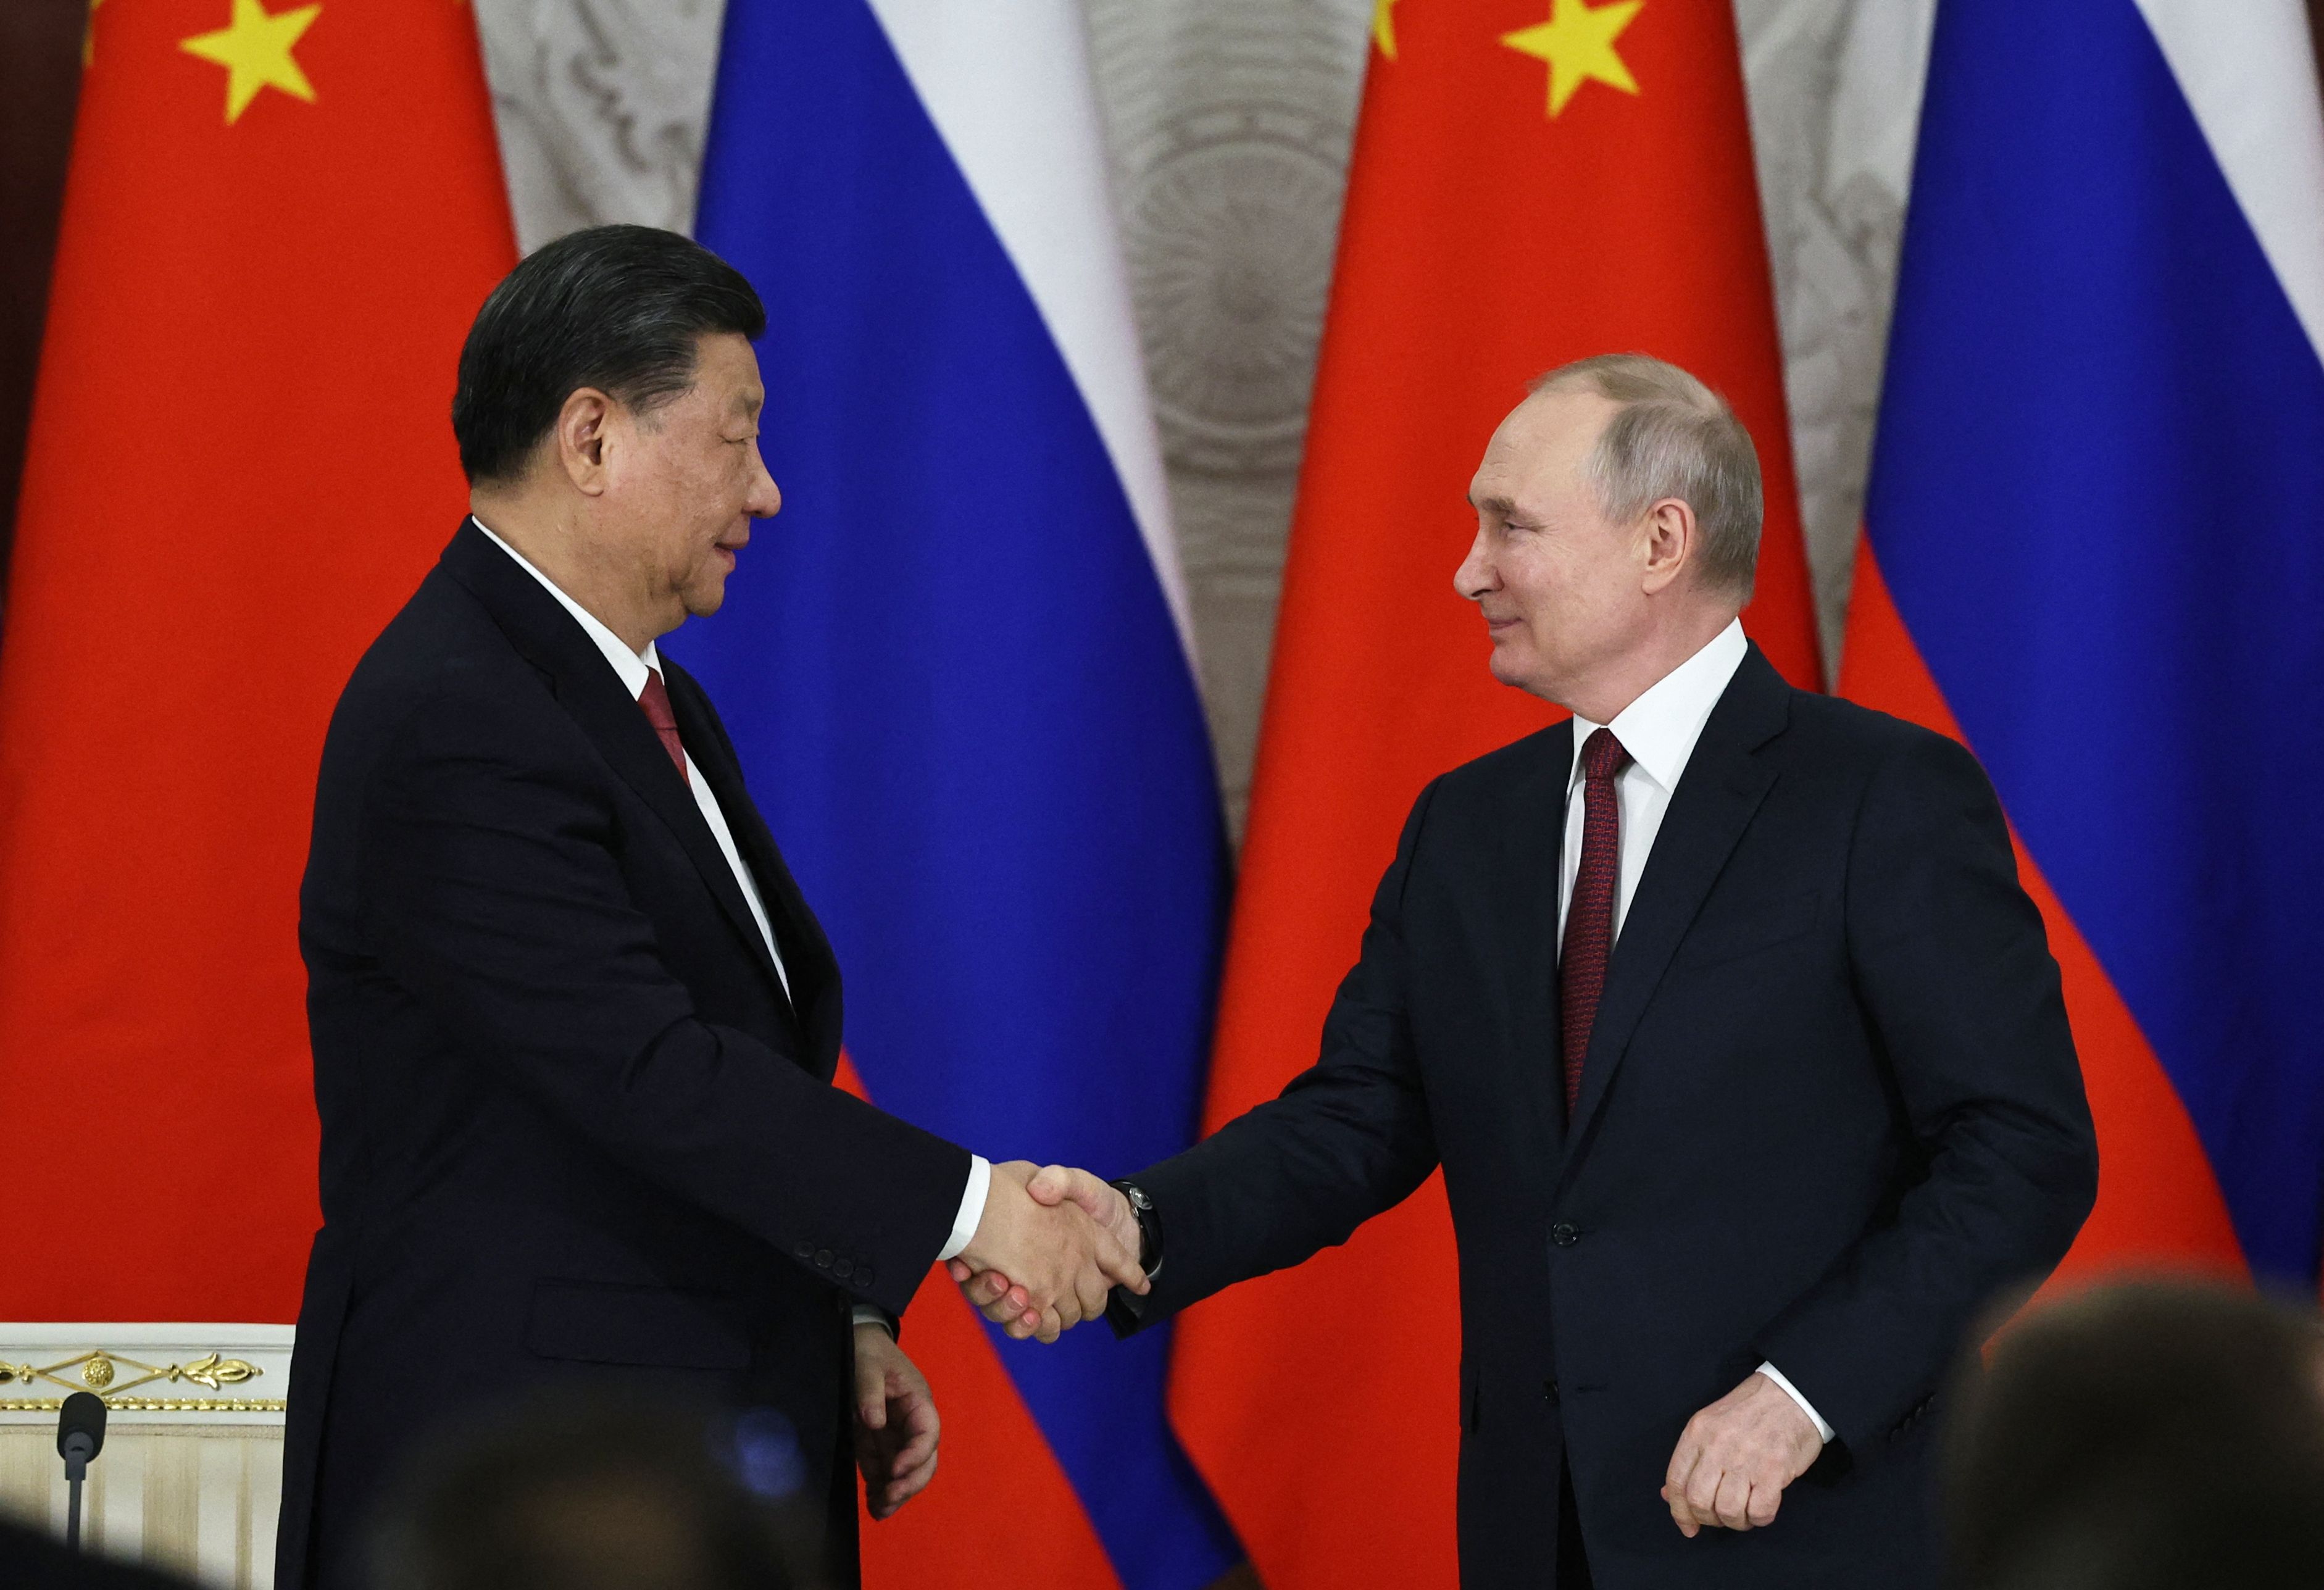 Xi’s comments to Putin about “driving changes together” caught on video